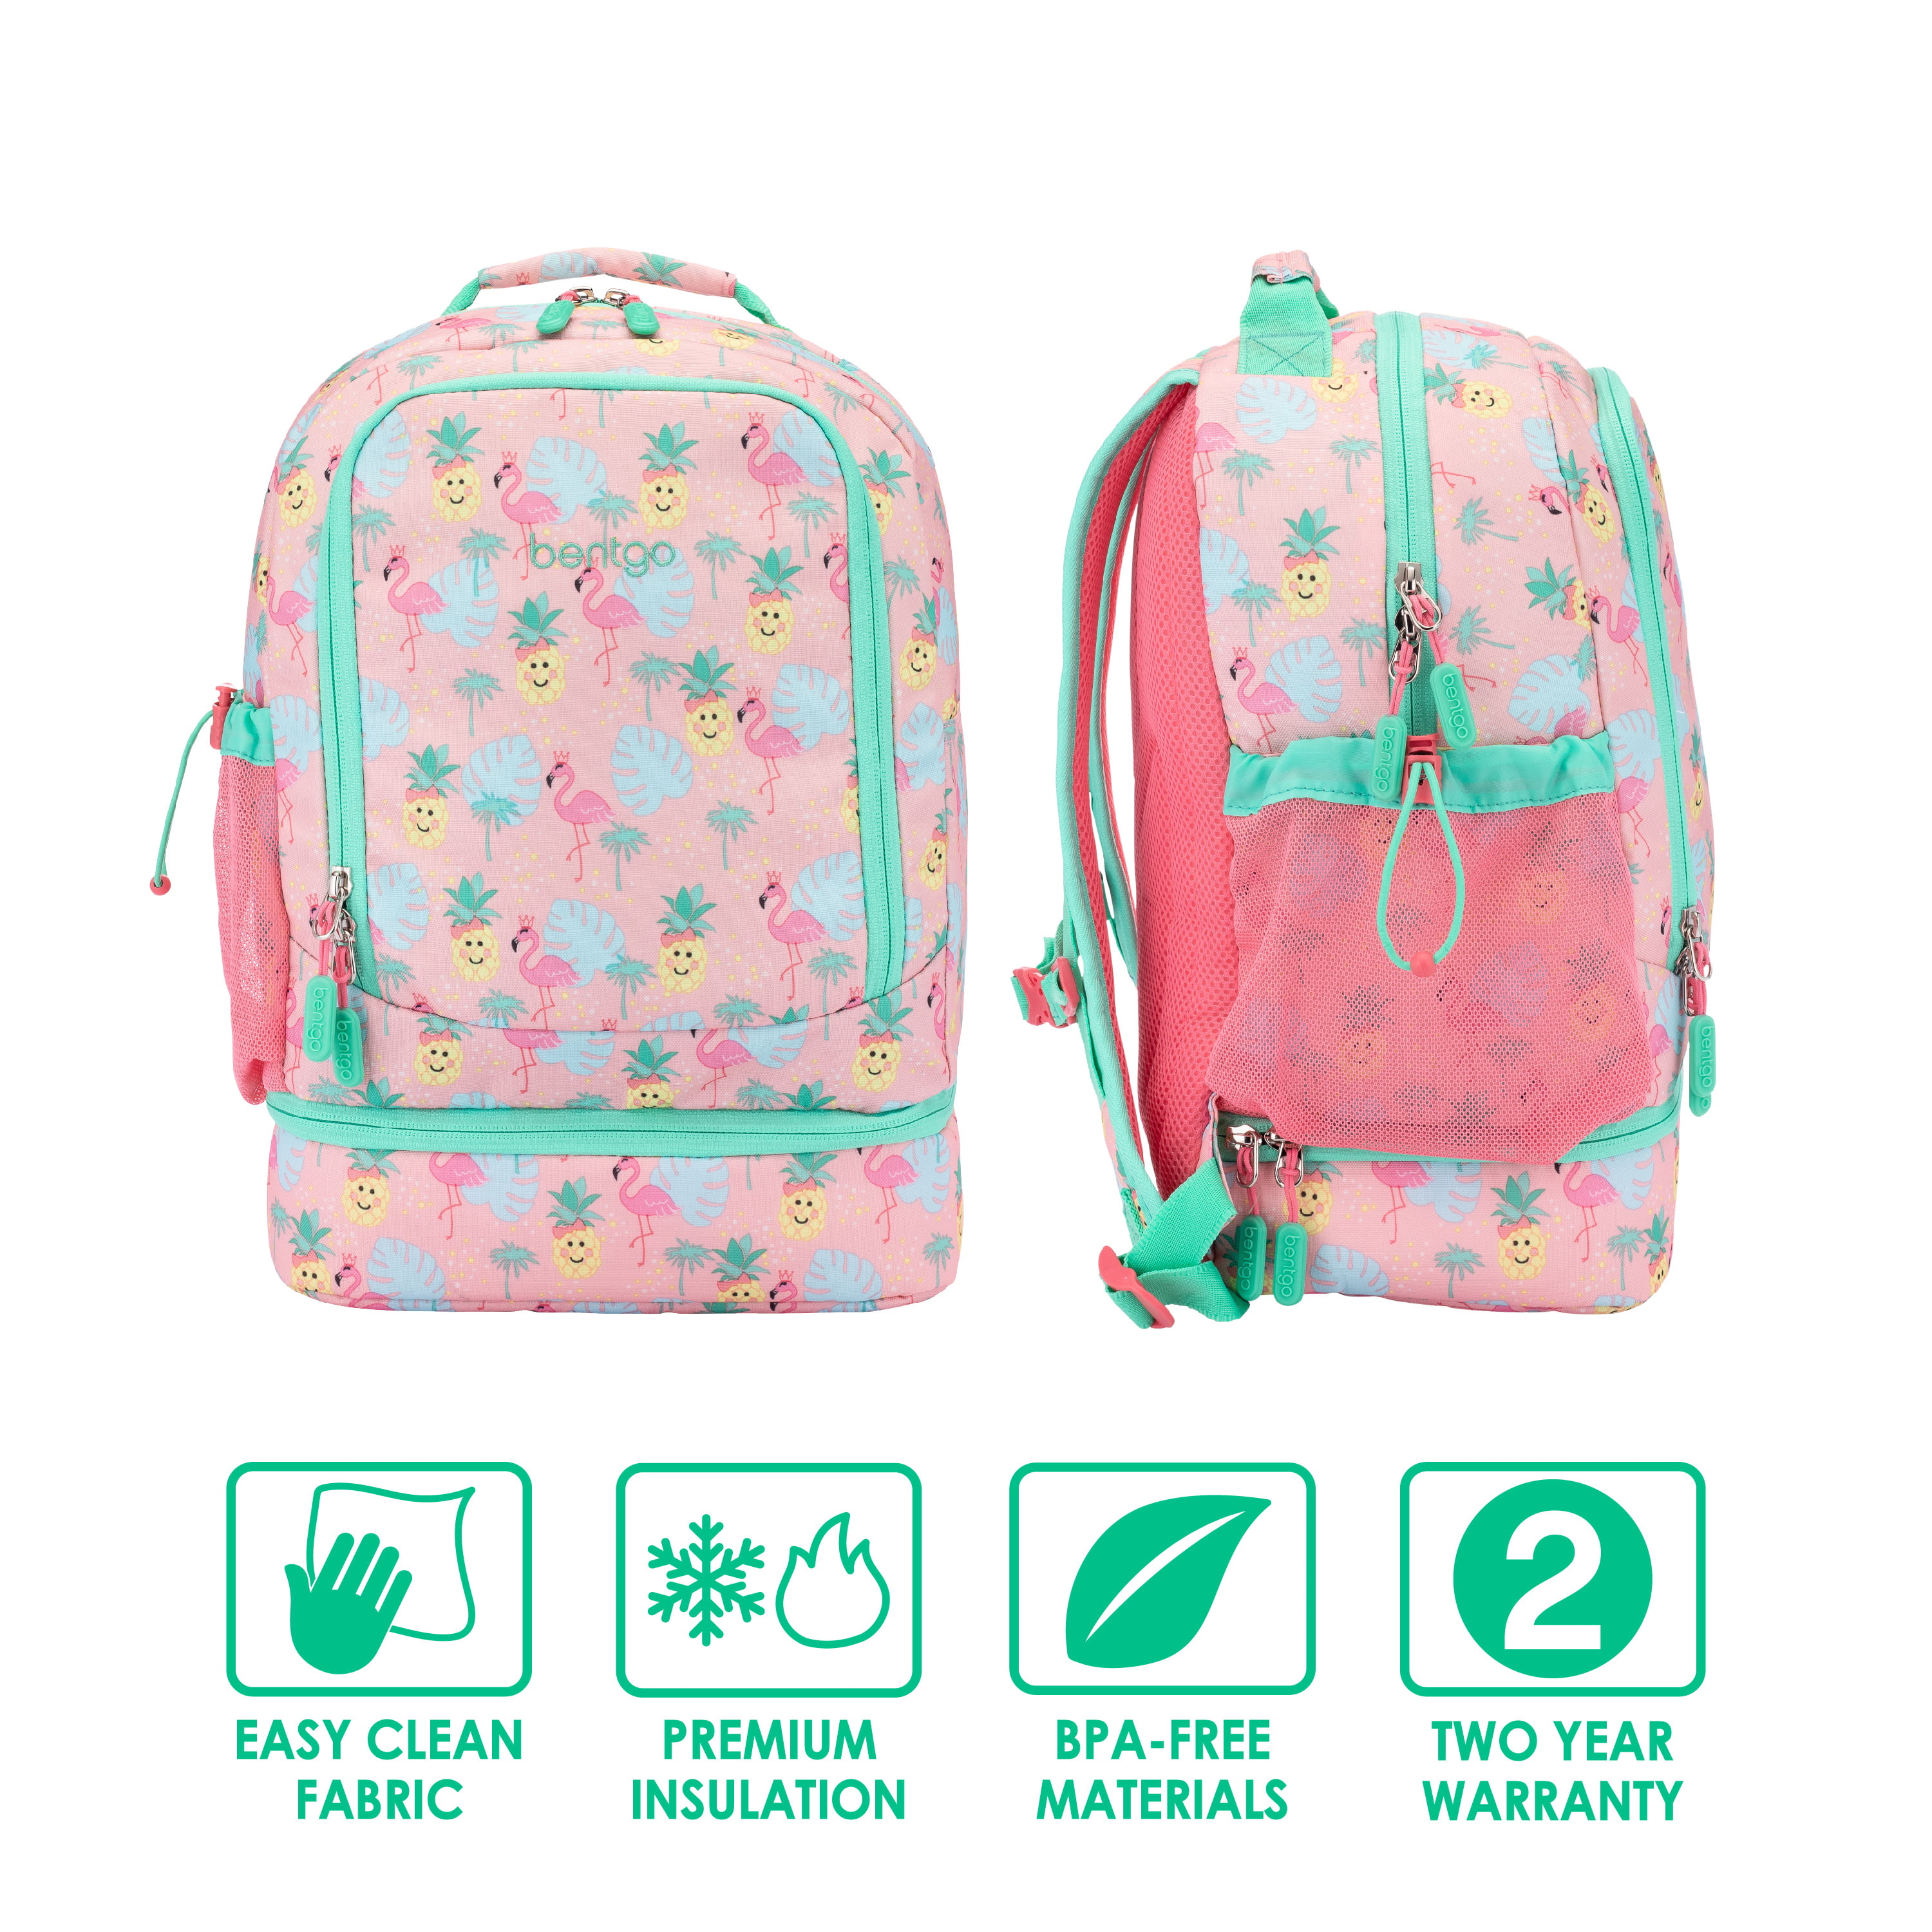  Bentgo® Kids Backpack - Lightweight 14”, Unique Prints for  School, Travel, & Daycare - Roomy Interior, Durable & Water-Resistant  Fabric, & Loop for Lunch Bag (Puppy Love)